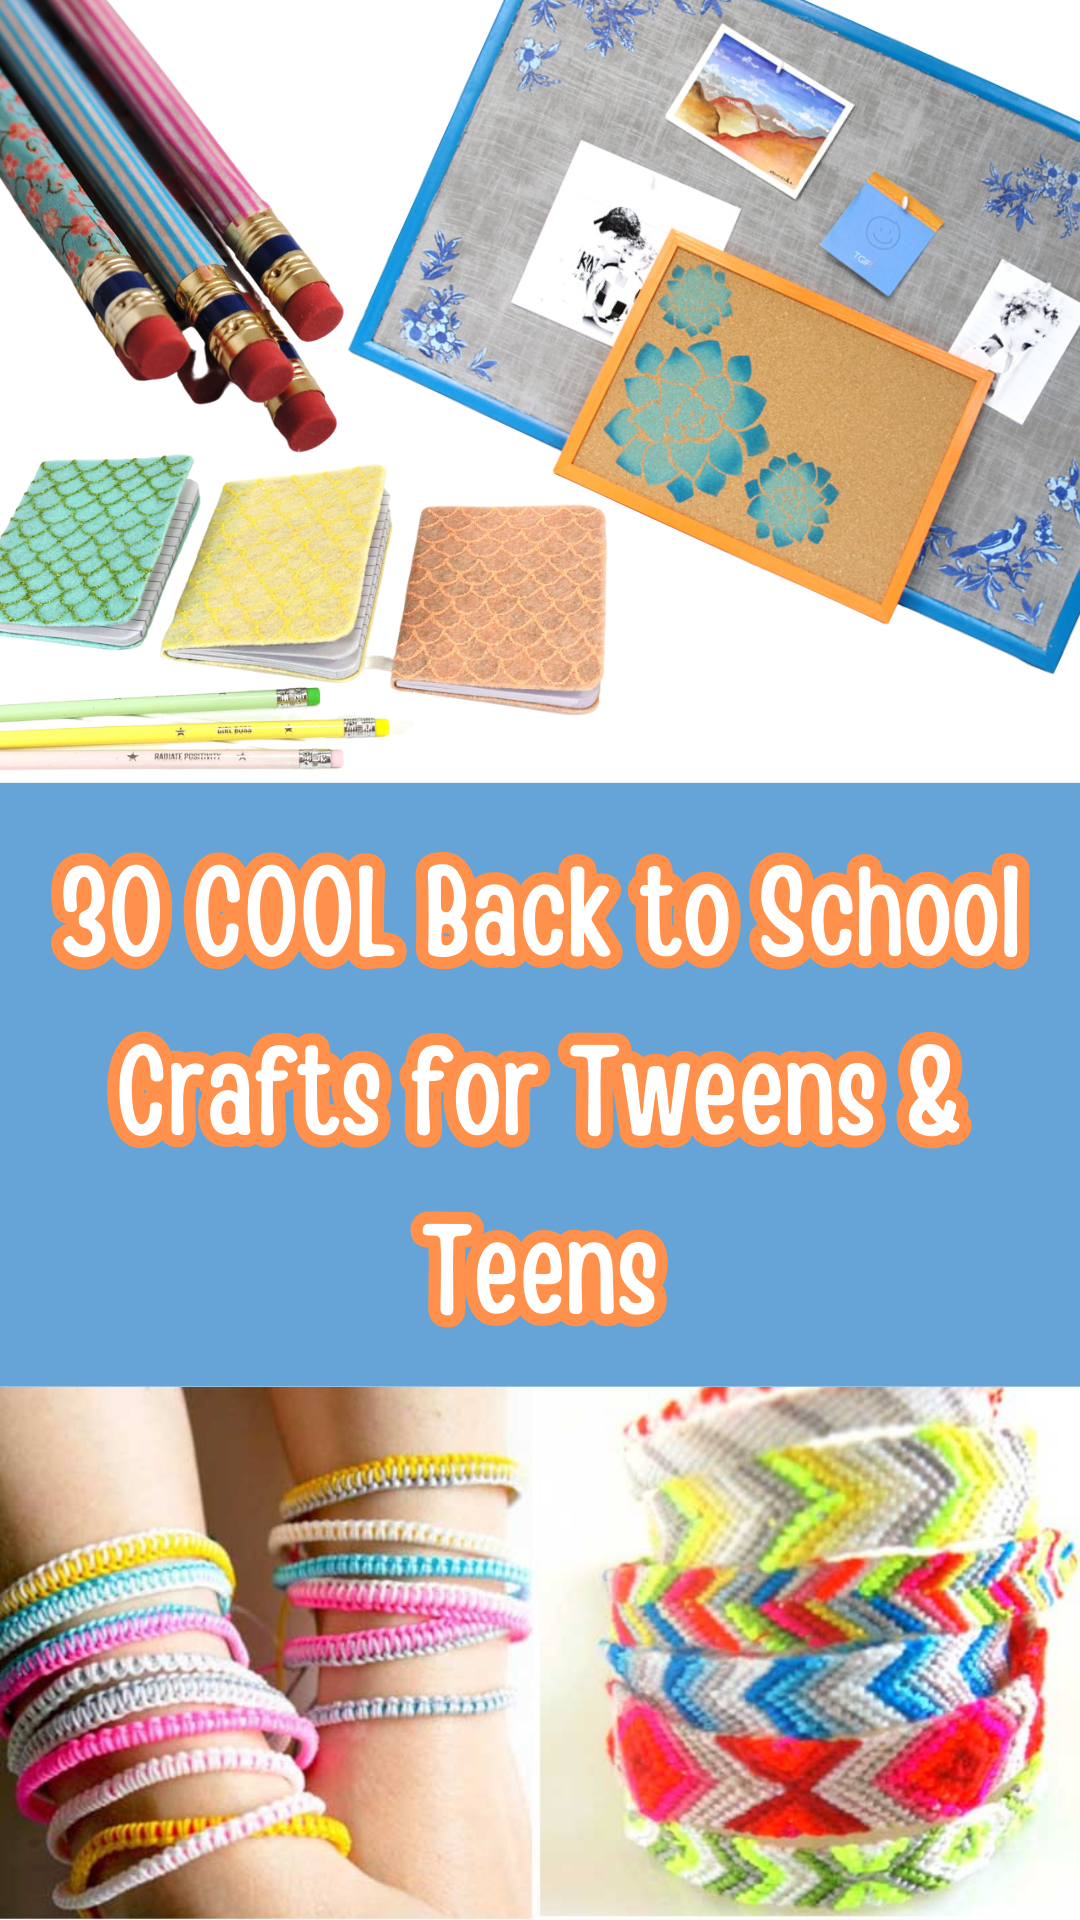 30 COOL Back to school crafts for tweens and teens